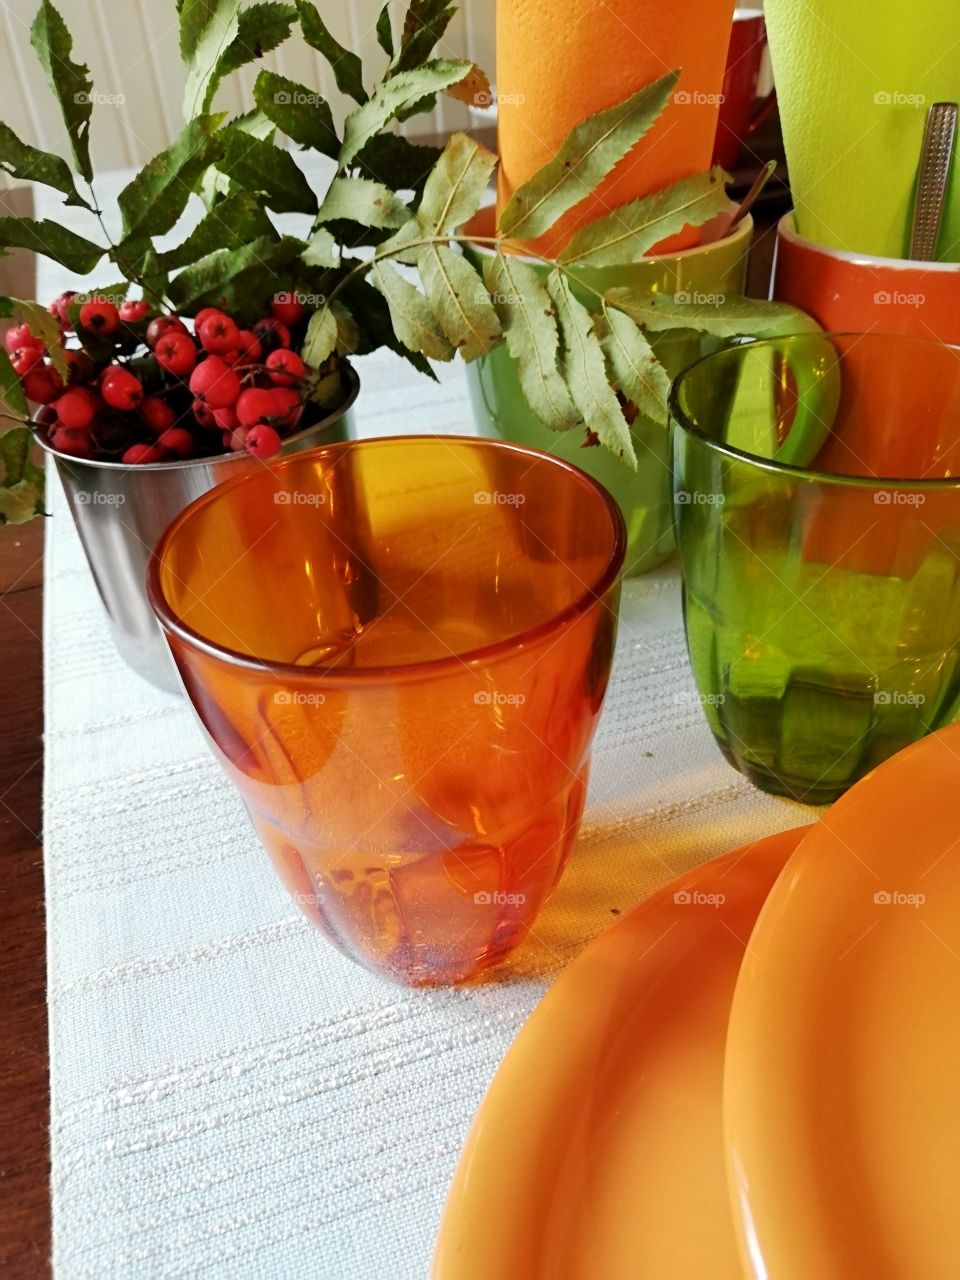 Couple of green and orange glasses and ceramic mugs, two orange plates on a light blue table cloth, which is embossed. In the cups napkins and teaspoons, a branch of rowan berries in a silver color tin.